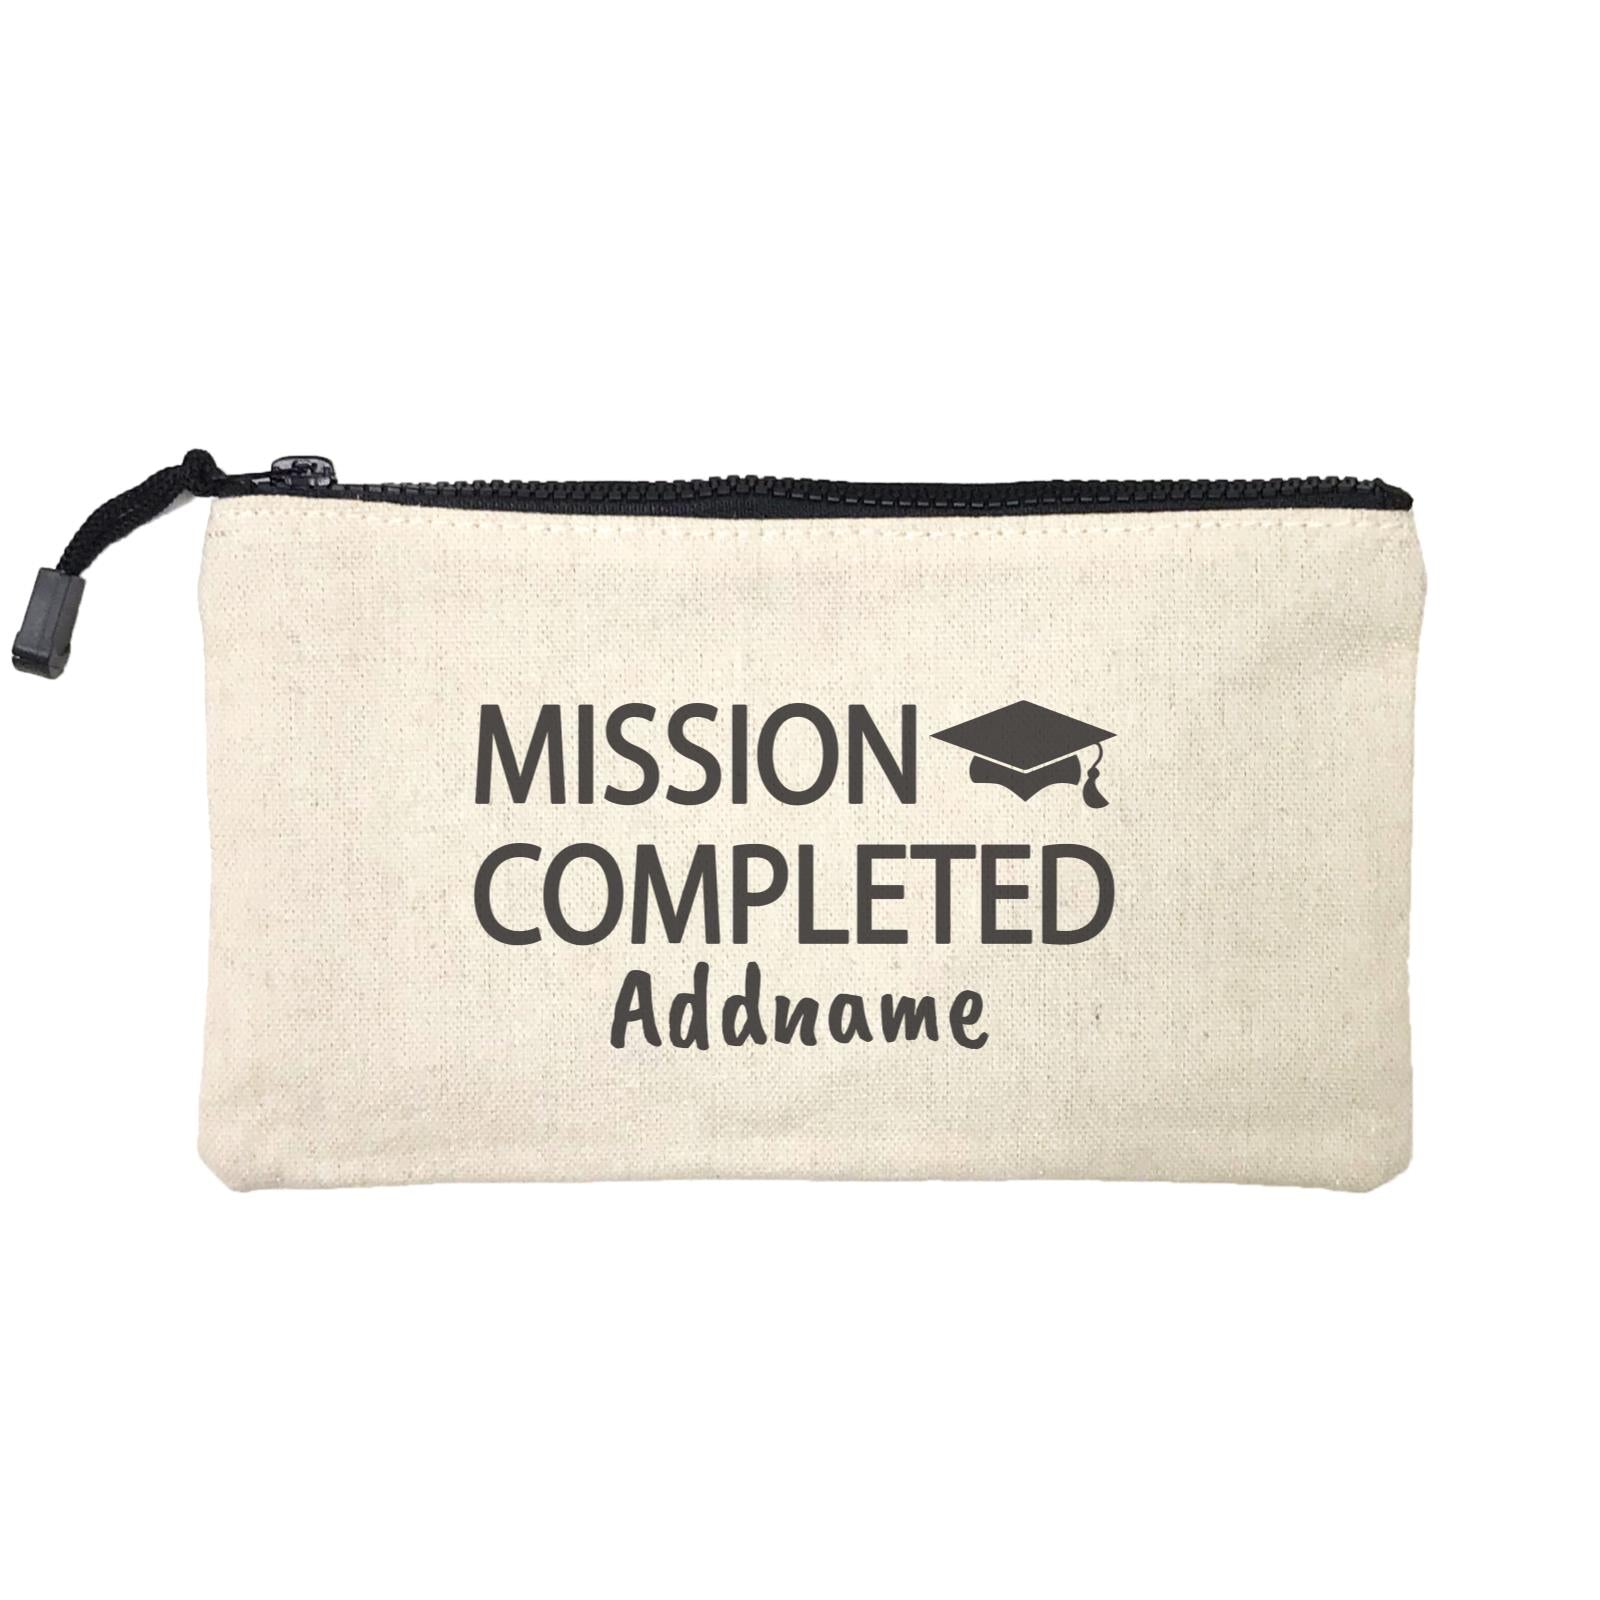 Graduation Series Mission Completed Mini Accessories Stationery Pouch